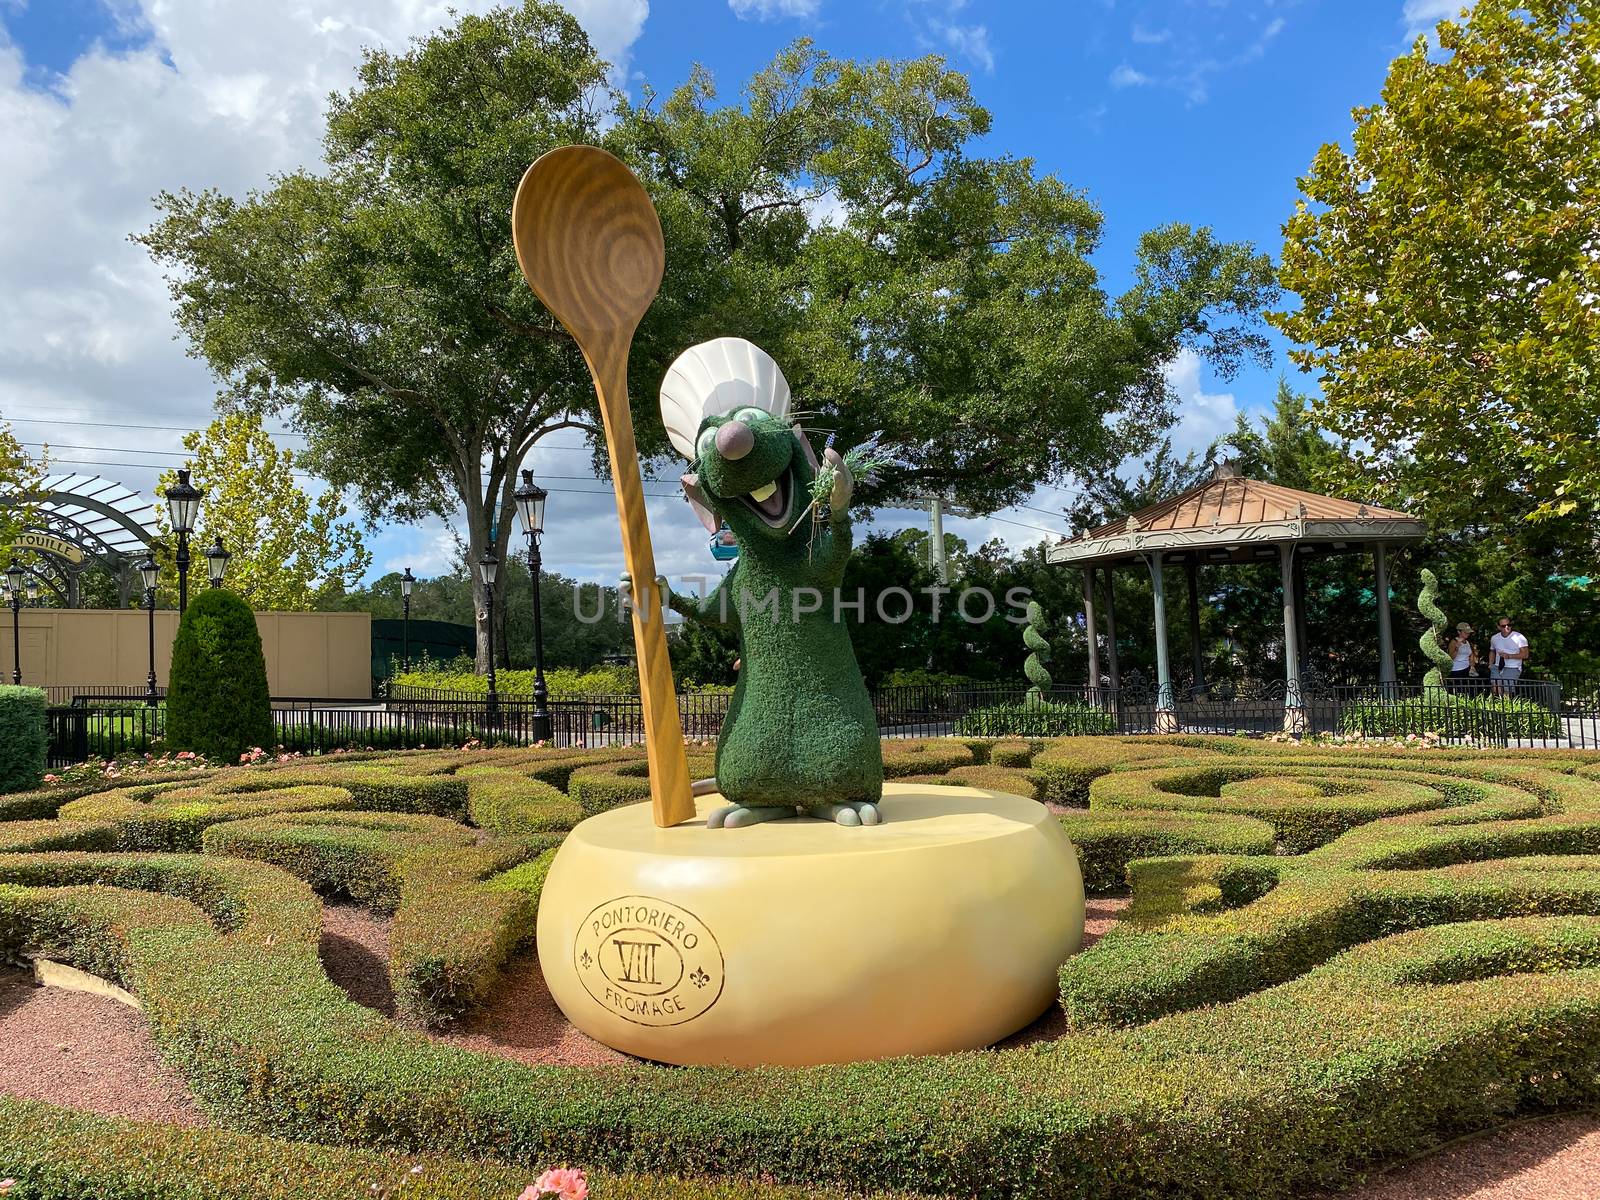 Orlando,FL/USA-10/24/20: The Remy, from the movie Ratatouille,  topiary statue in the France area of the World Showcase in EPCOT at Disney World in Orlando, Florida.